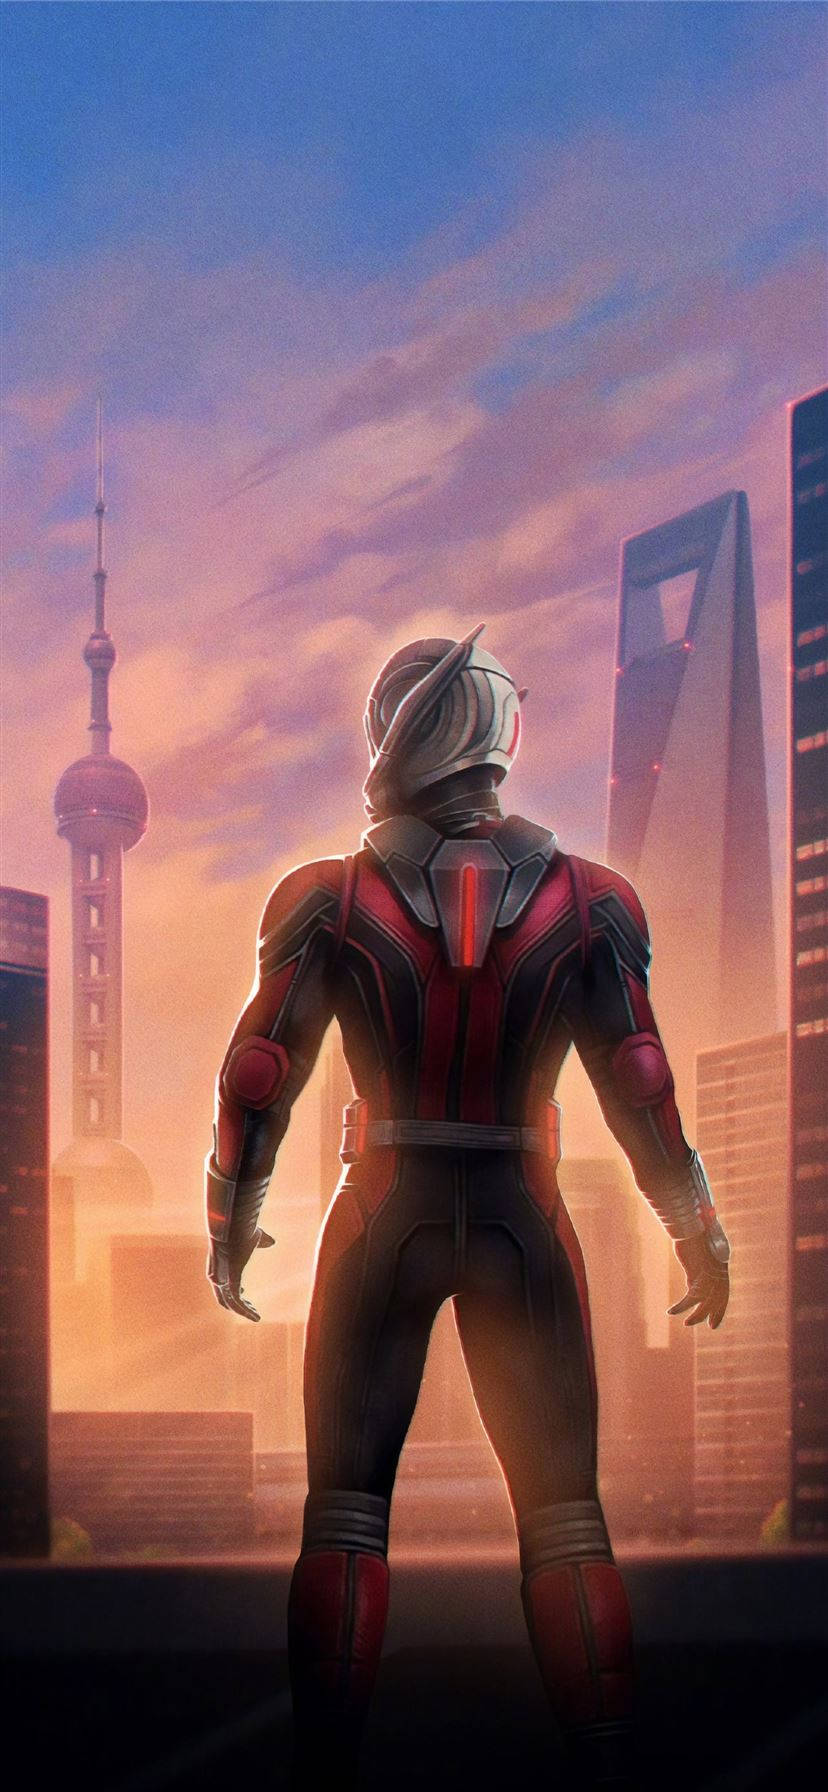 Ant Man Wallpapers for Every Kind of Device